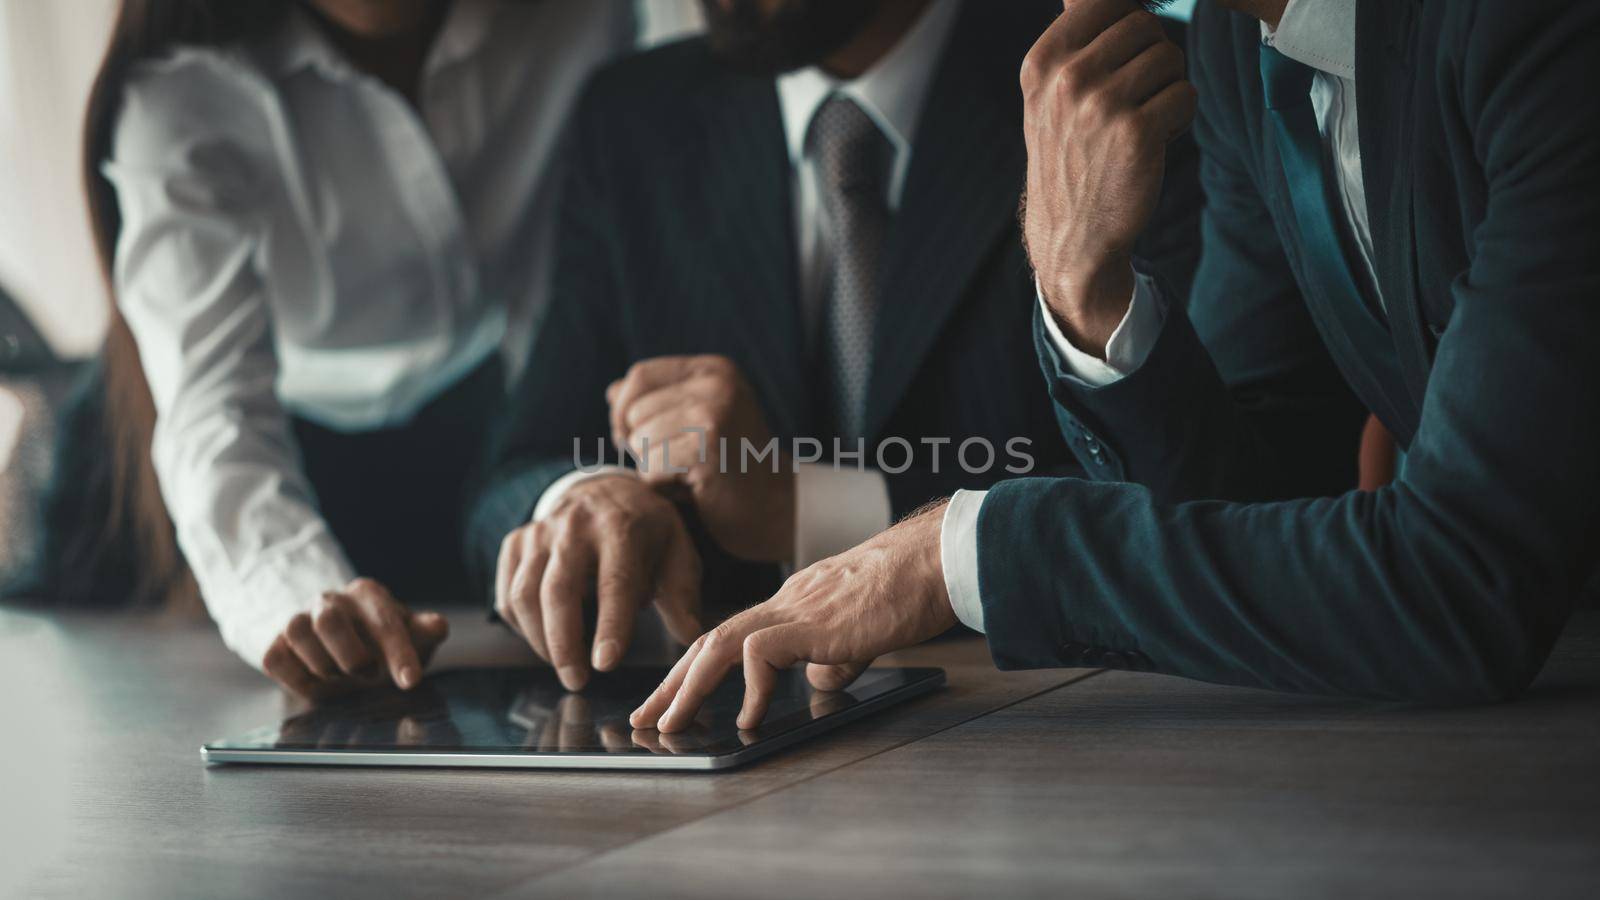 Business Team using digital tablet together. Hands of business people touching screen of electronic device. Toned image. Close up shot. Side view.